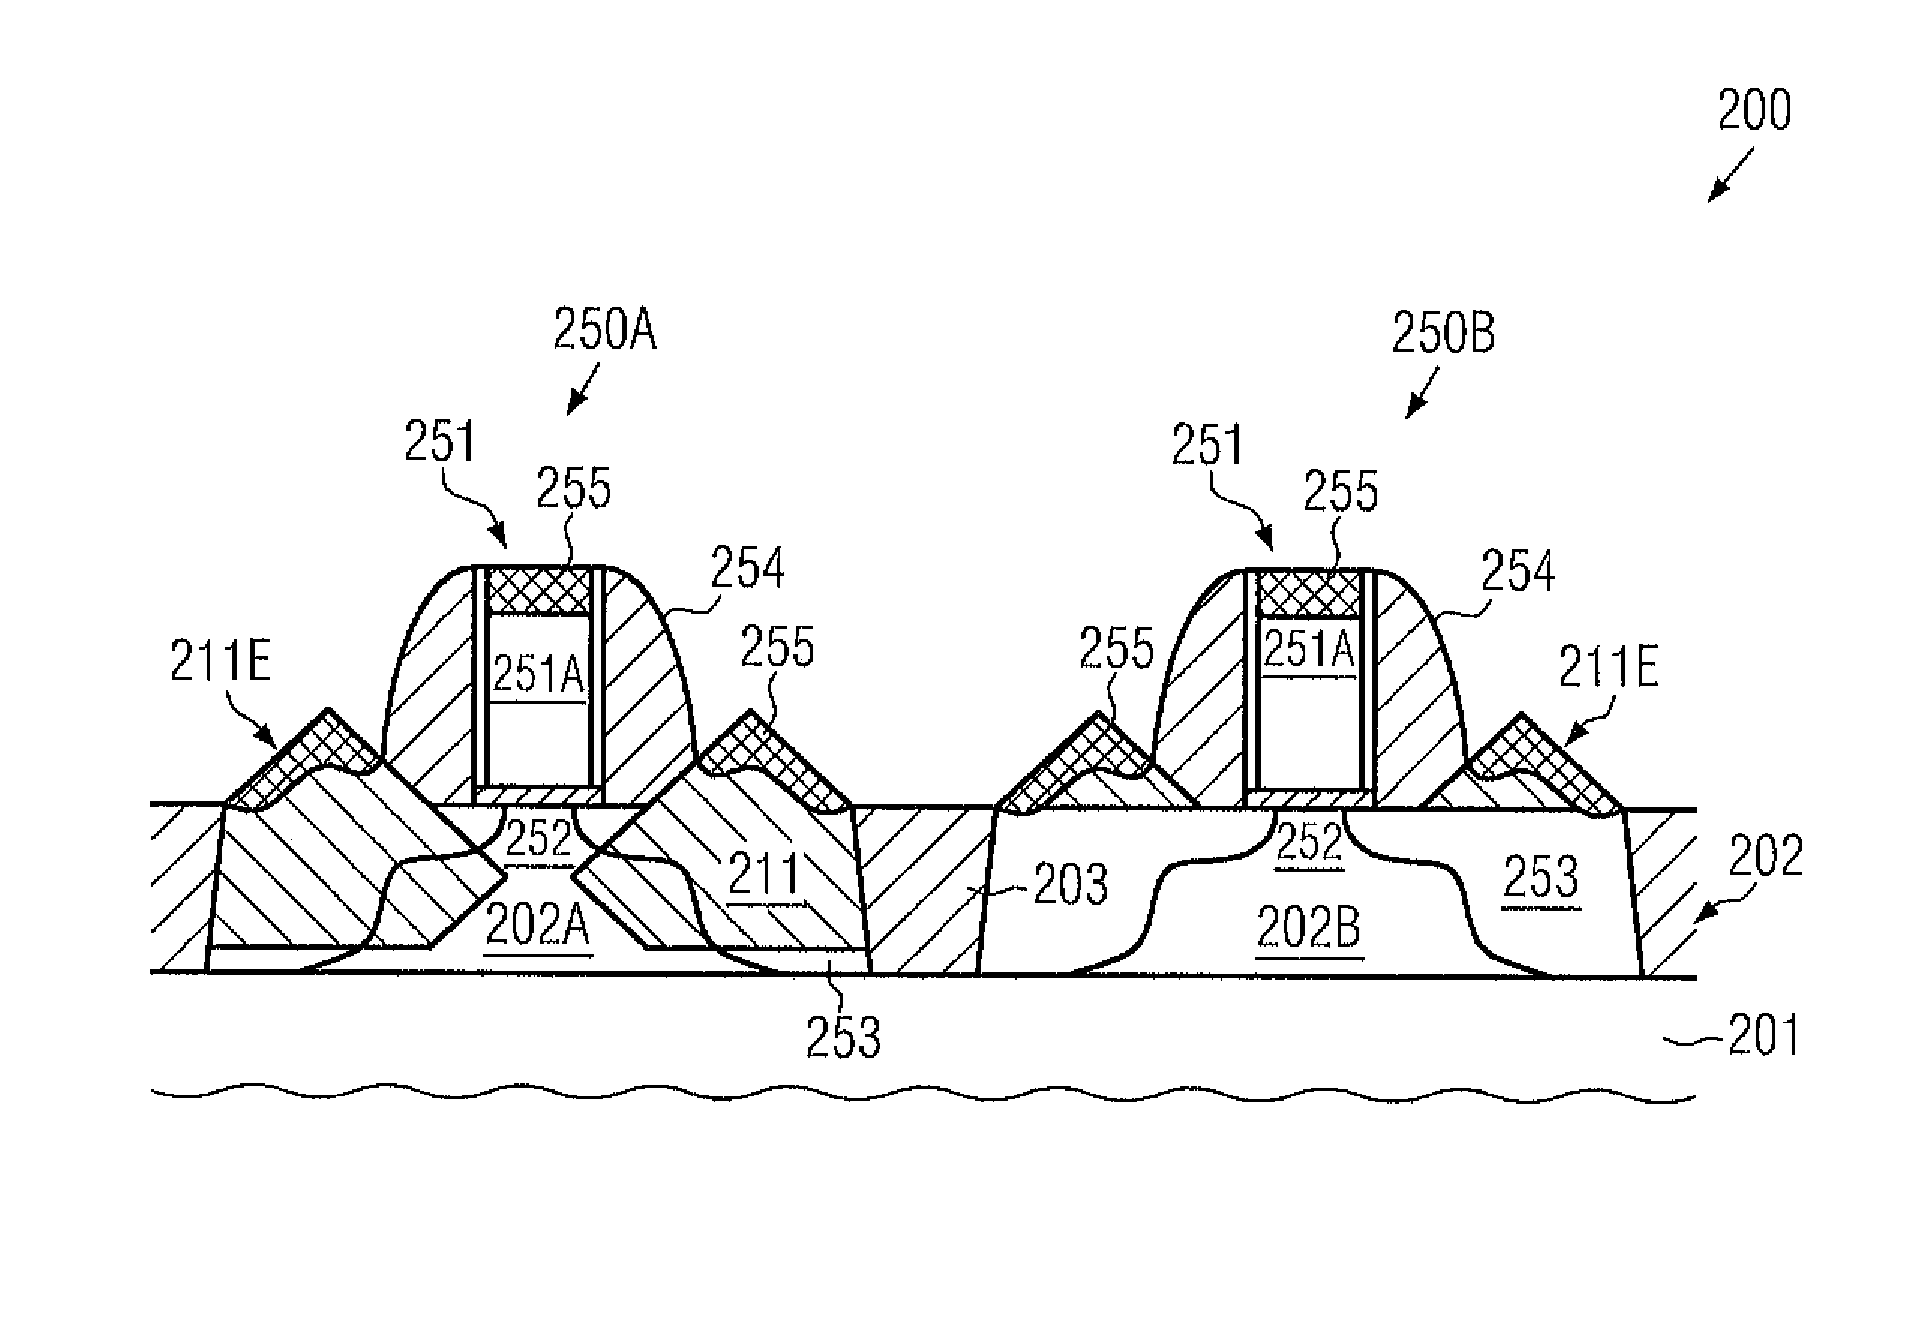 Transistor With Embedded Si/Ge Material Having Reduced Offset and Superior Uniformity